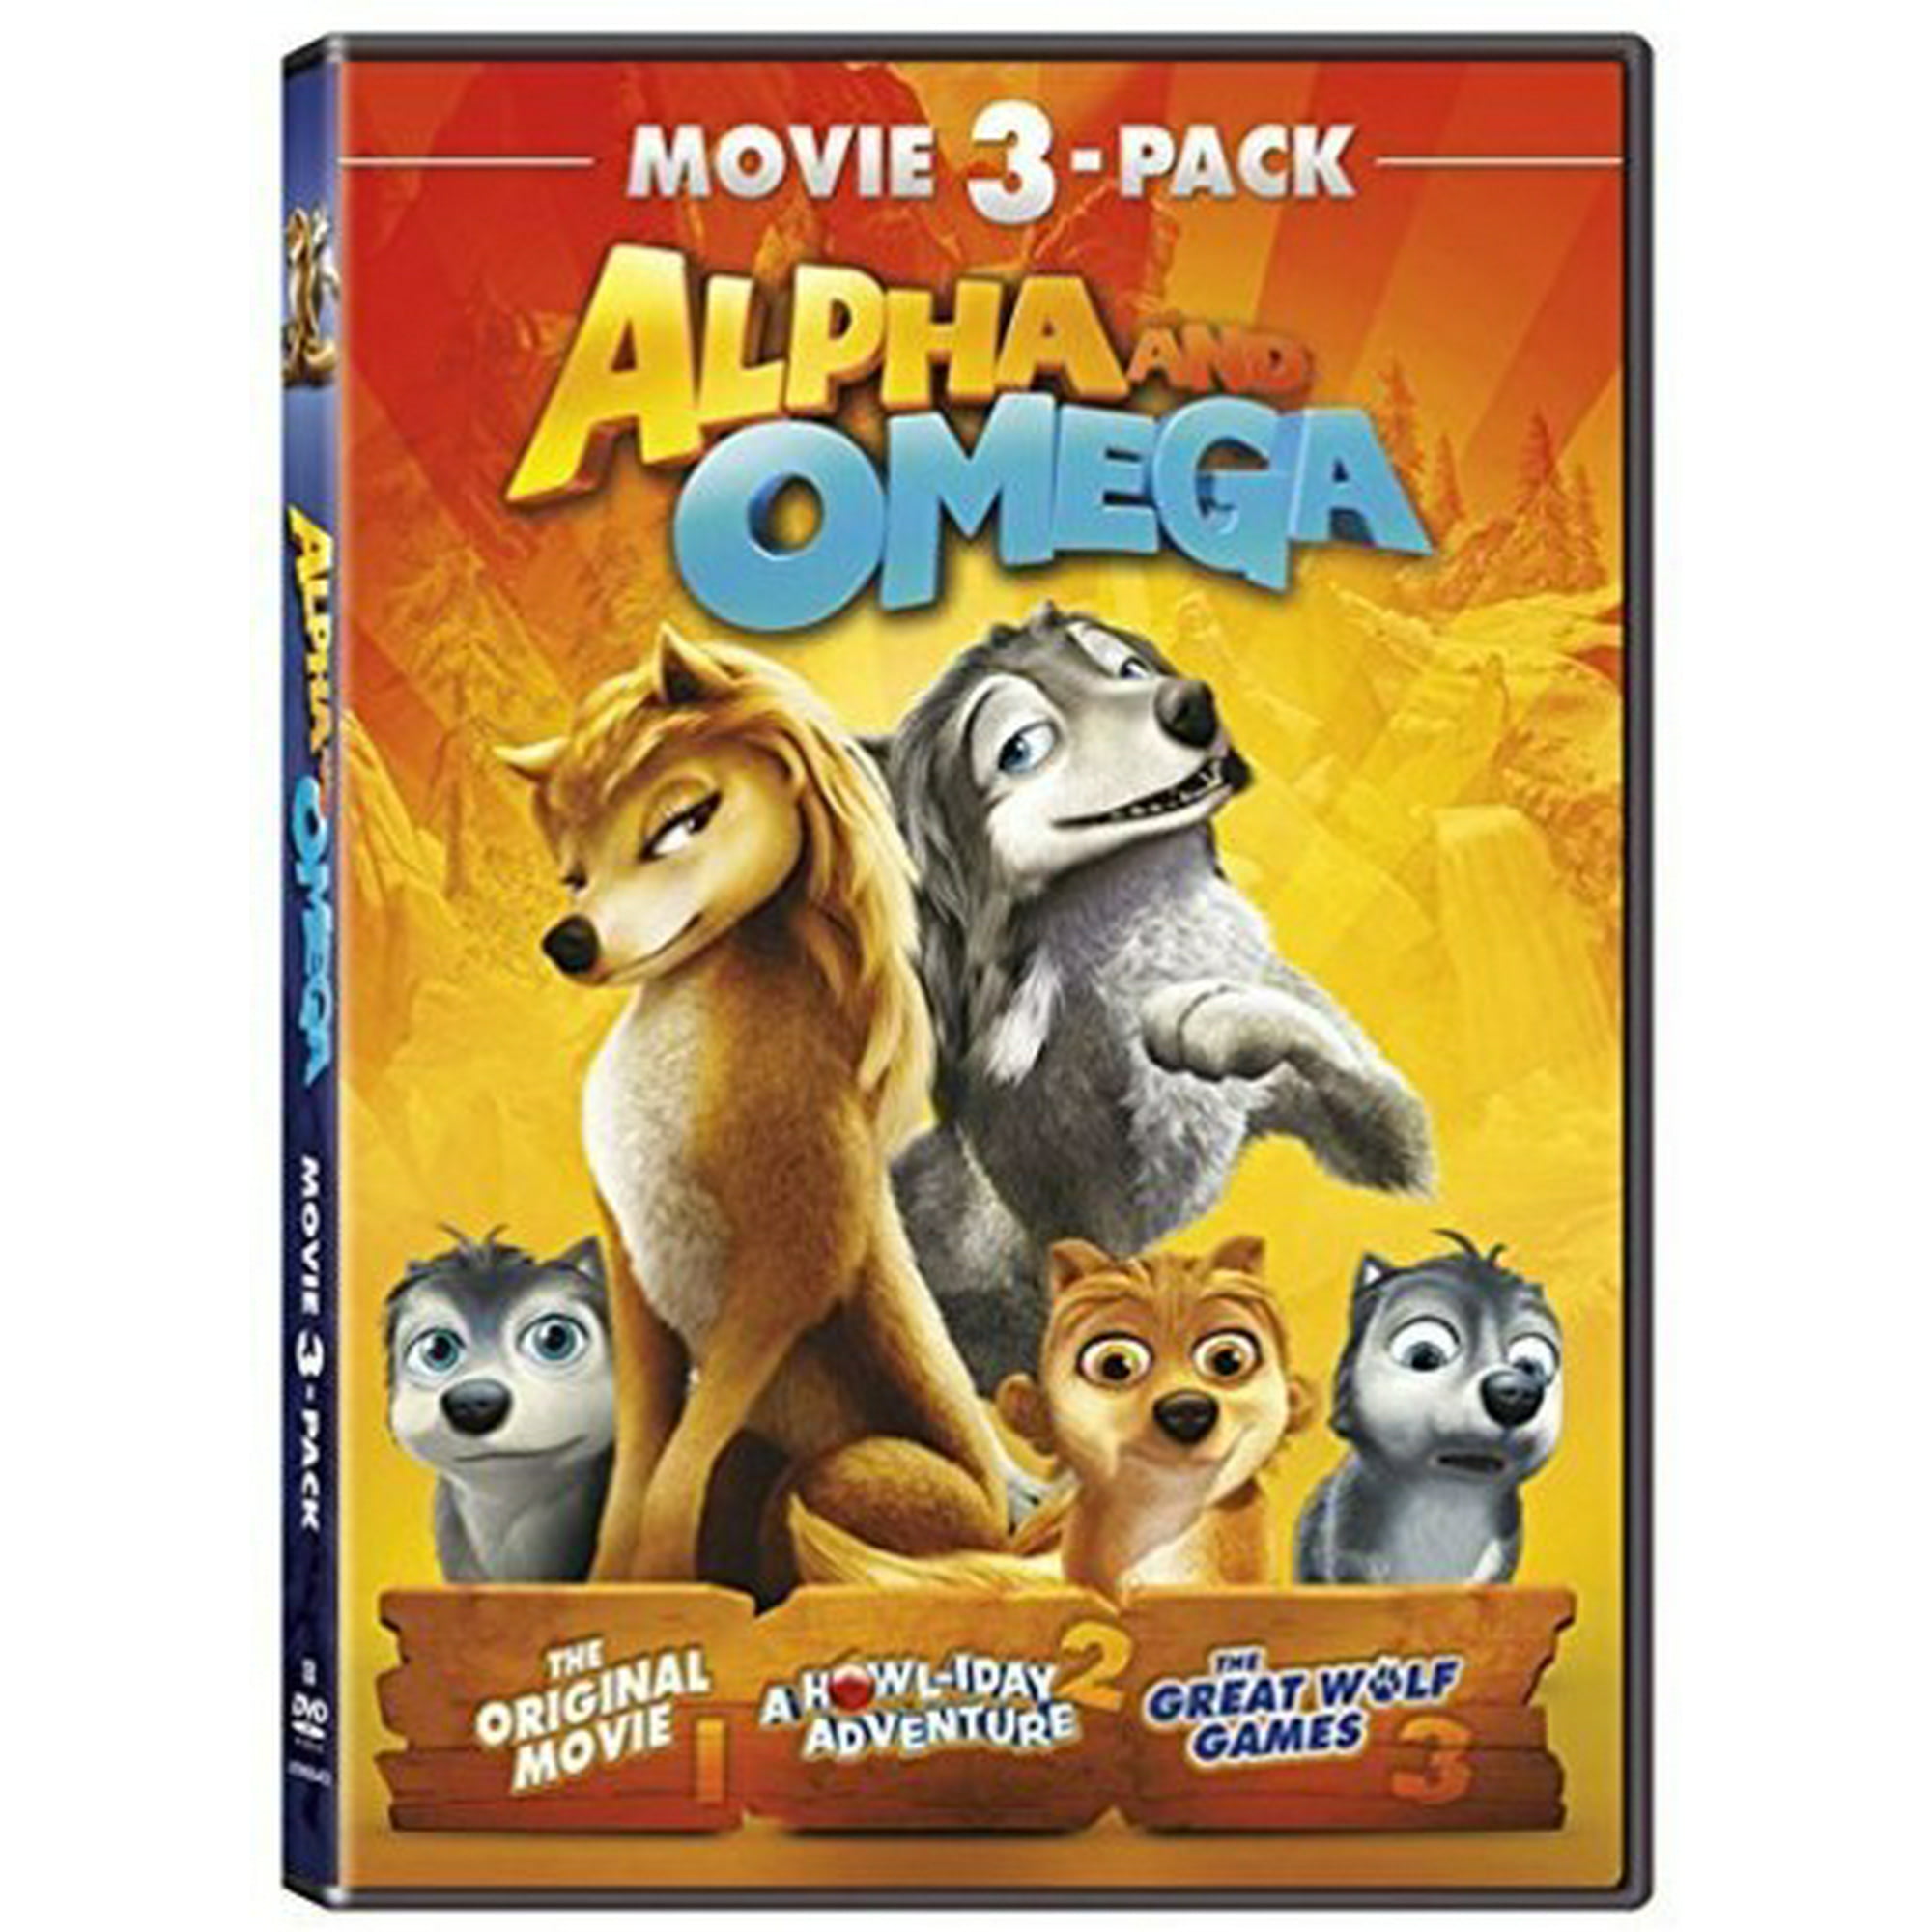 Alpha and Omega: 3-movie Pack, Part 1 [DVD] 3 Pack, Ac-3/Dolby Digital,  Dolby | Walmart Canada